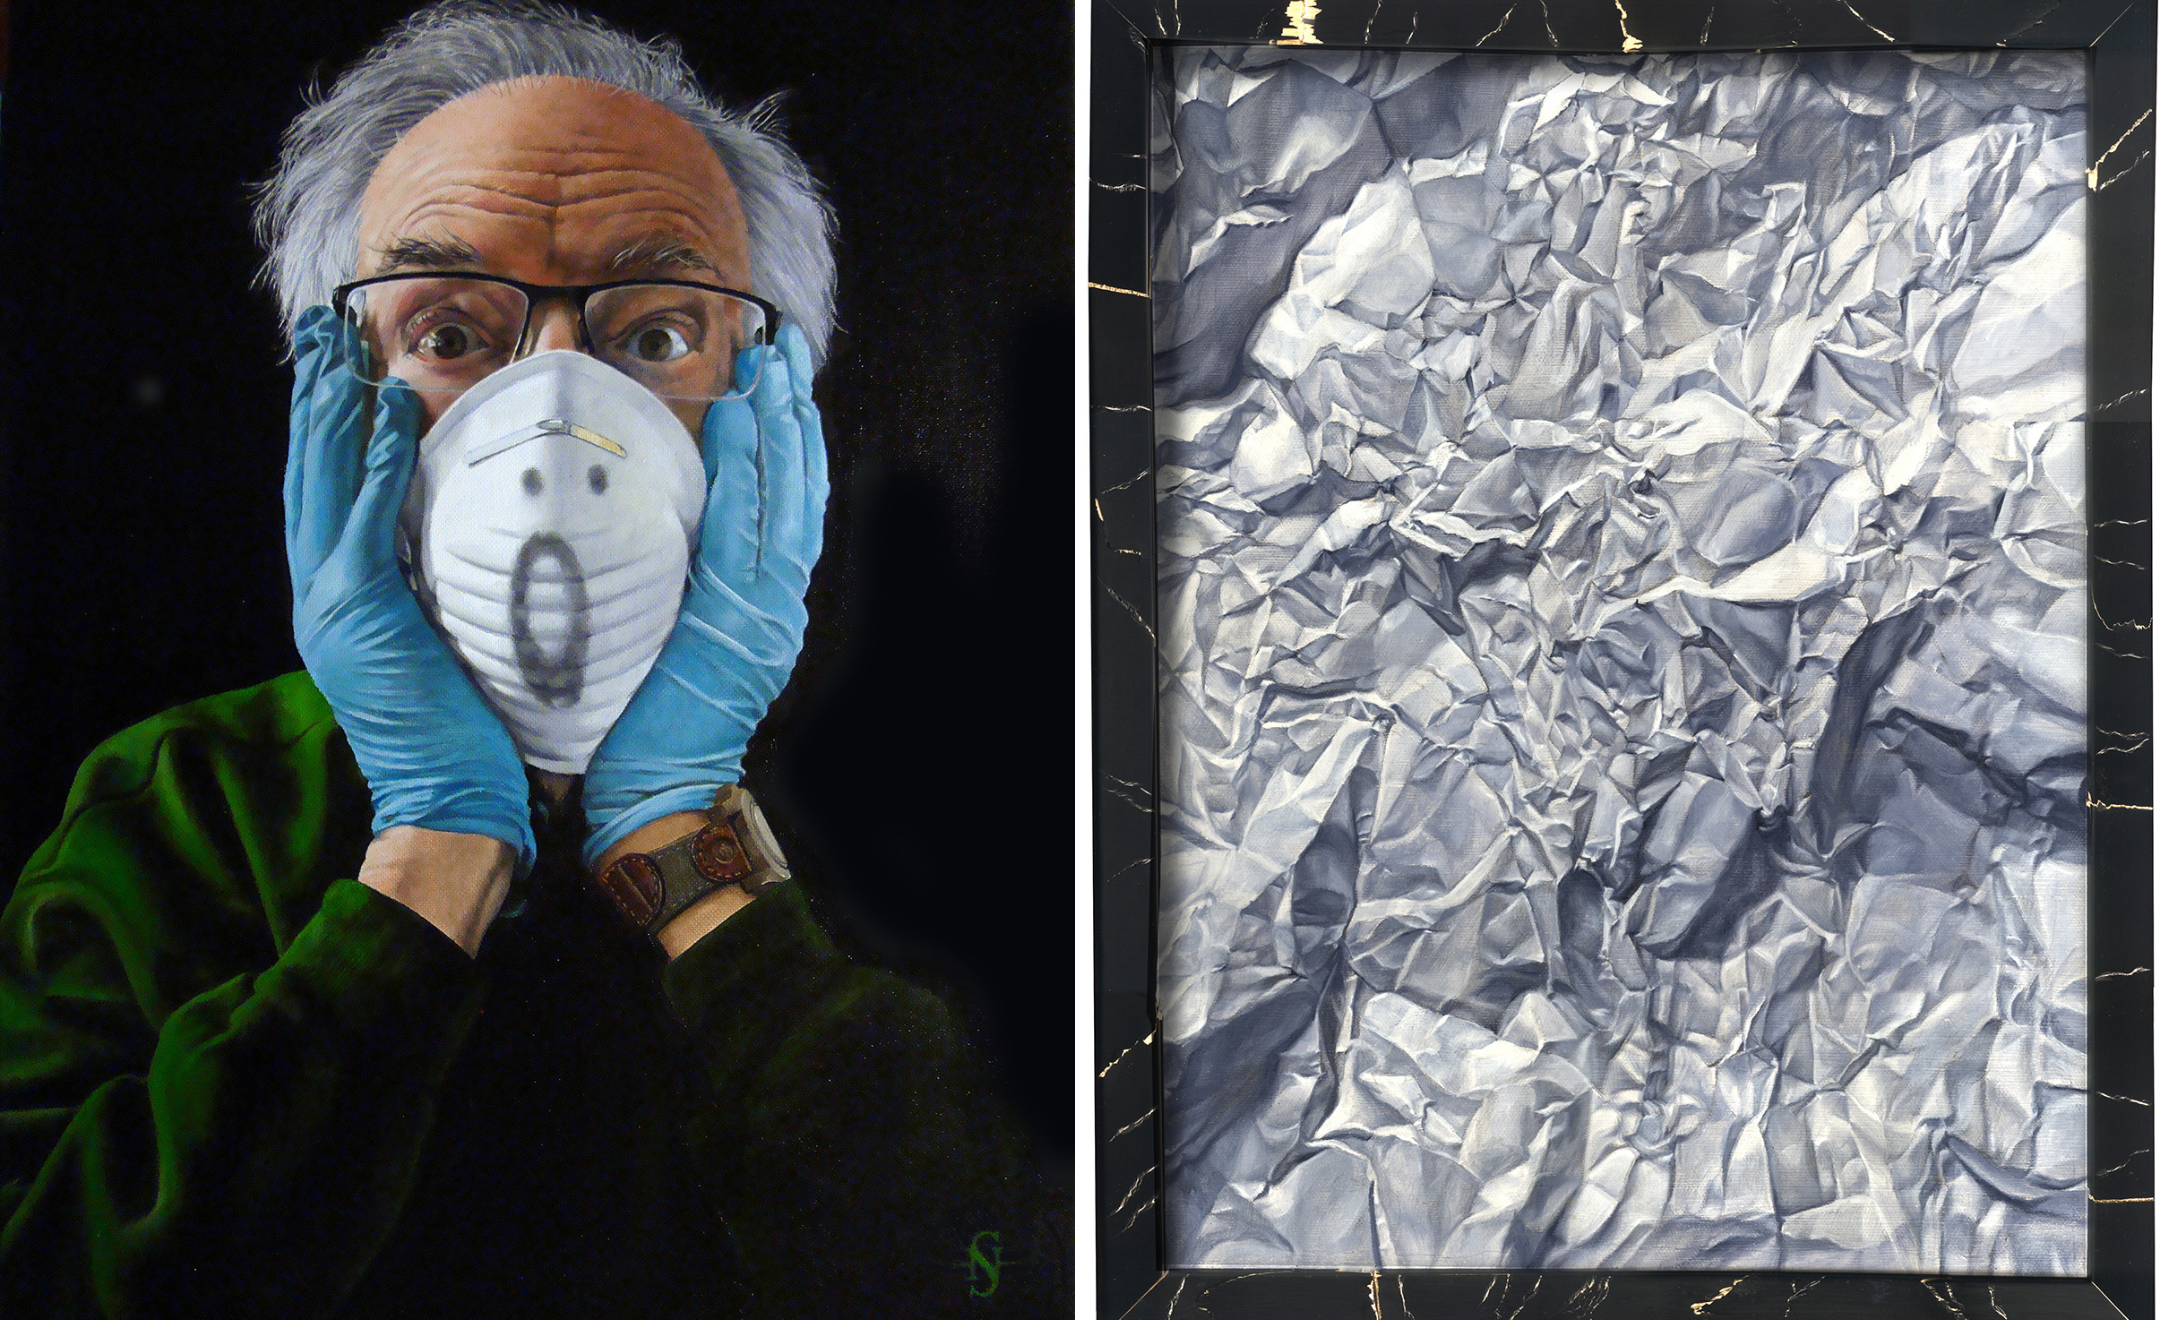 Art Siegel works (L to R): The Scream (2020) and Crumpled (2016)